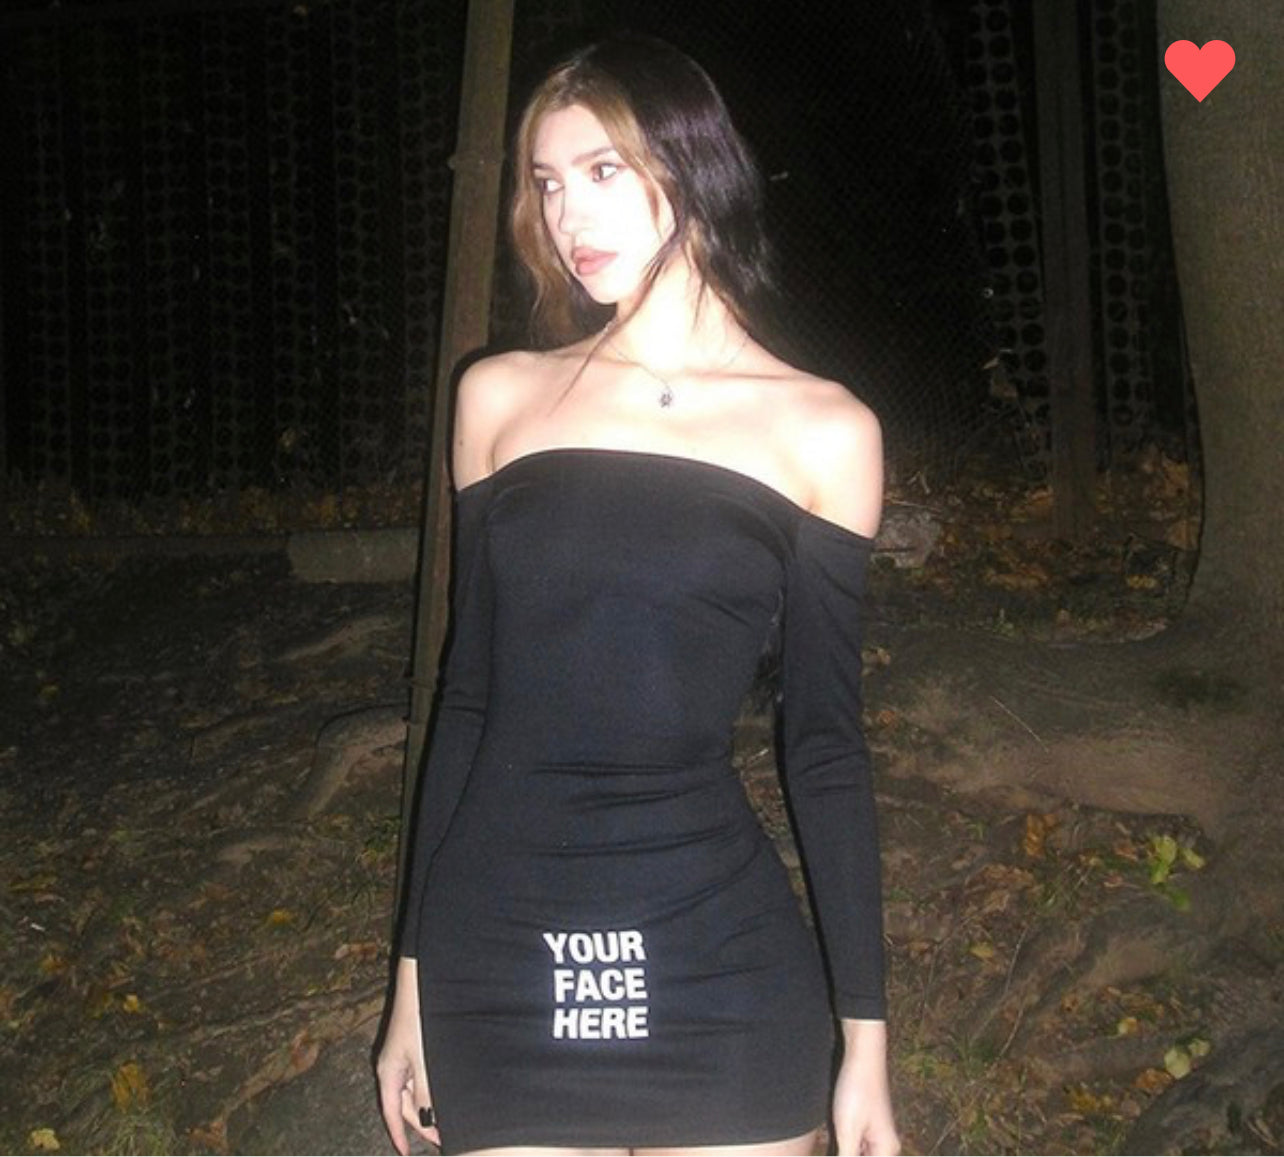 “YOUR FACE HERE” DRESS